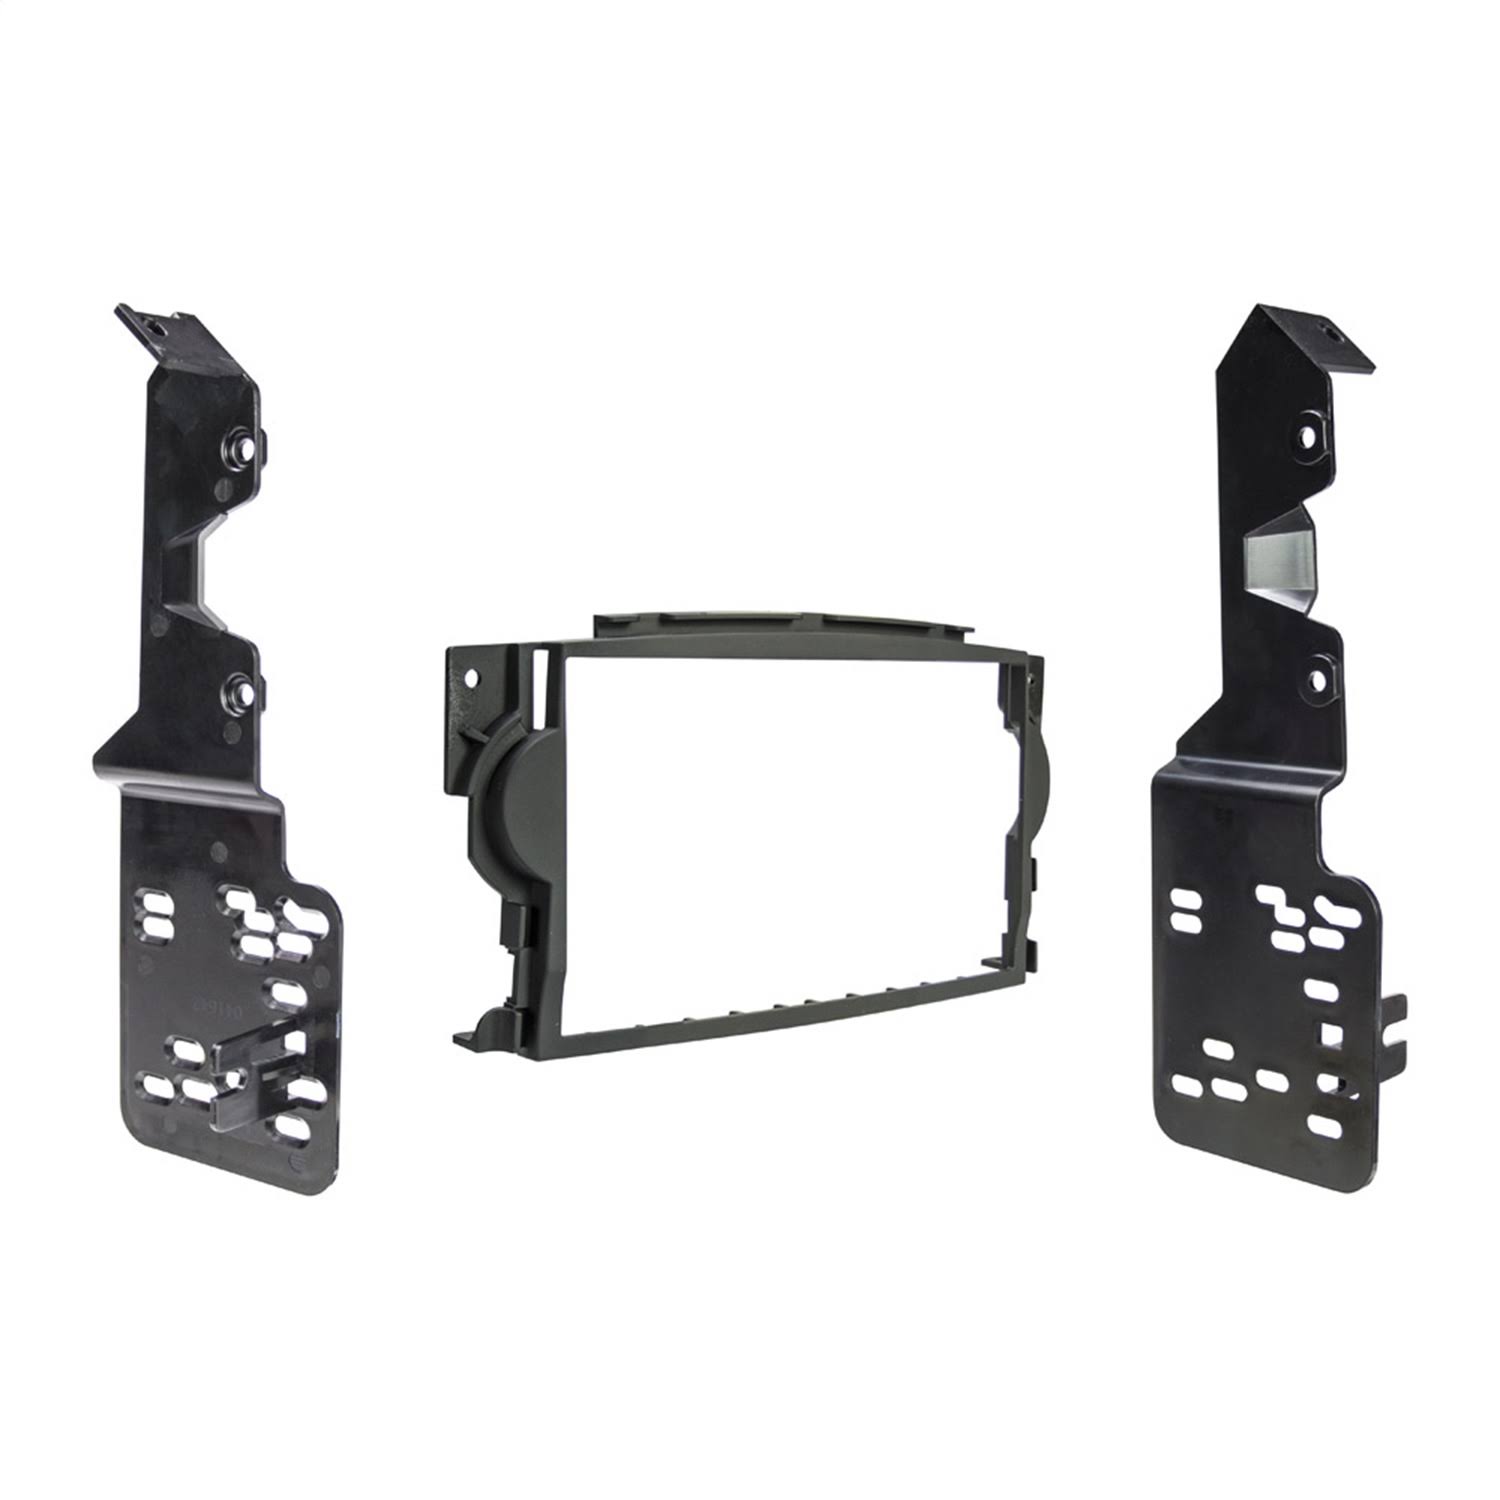 Metra 95-7815B Double Din Dash Kit - For 2004-2008 Acura TL